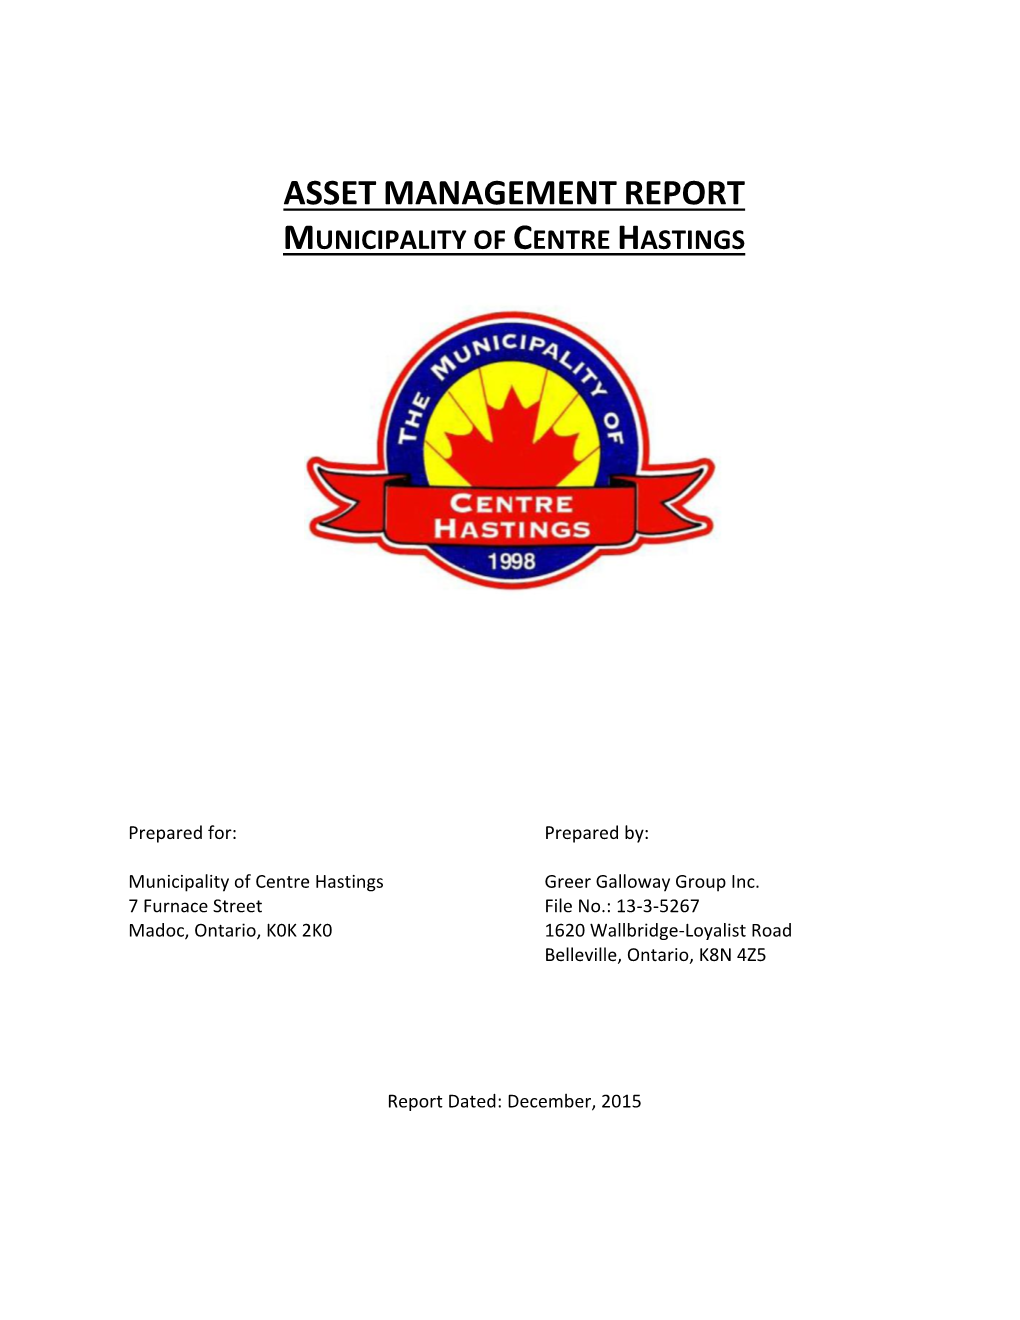 Asset Management Report Municipality of Centre Hastings